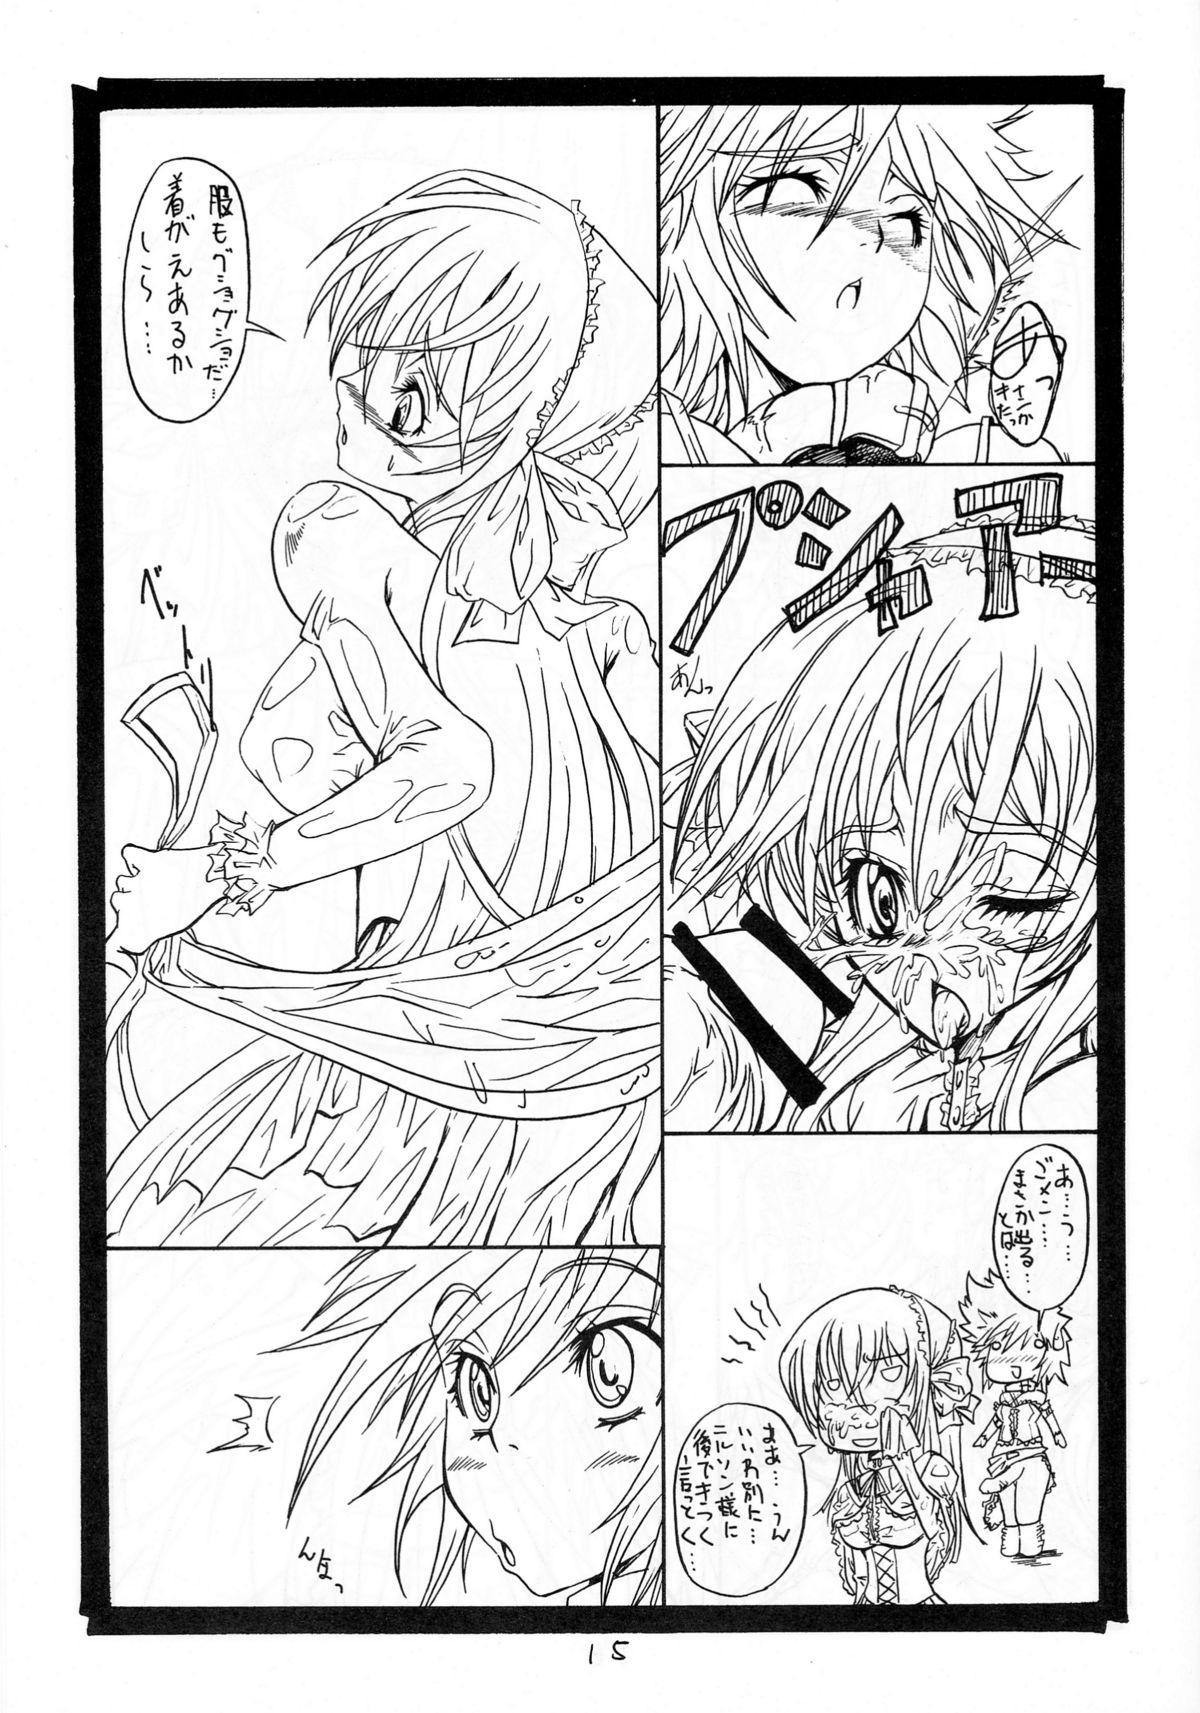 (C71) [S-G.H. (Oona Mitsutoshi)] SUICIDA DESESPERACION (Coyote Ragtime Show) page 15 full